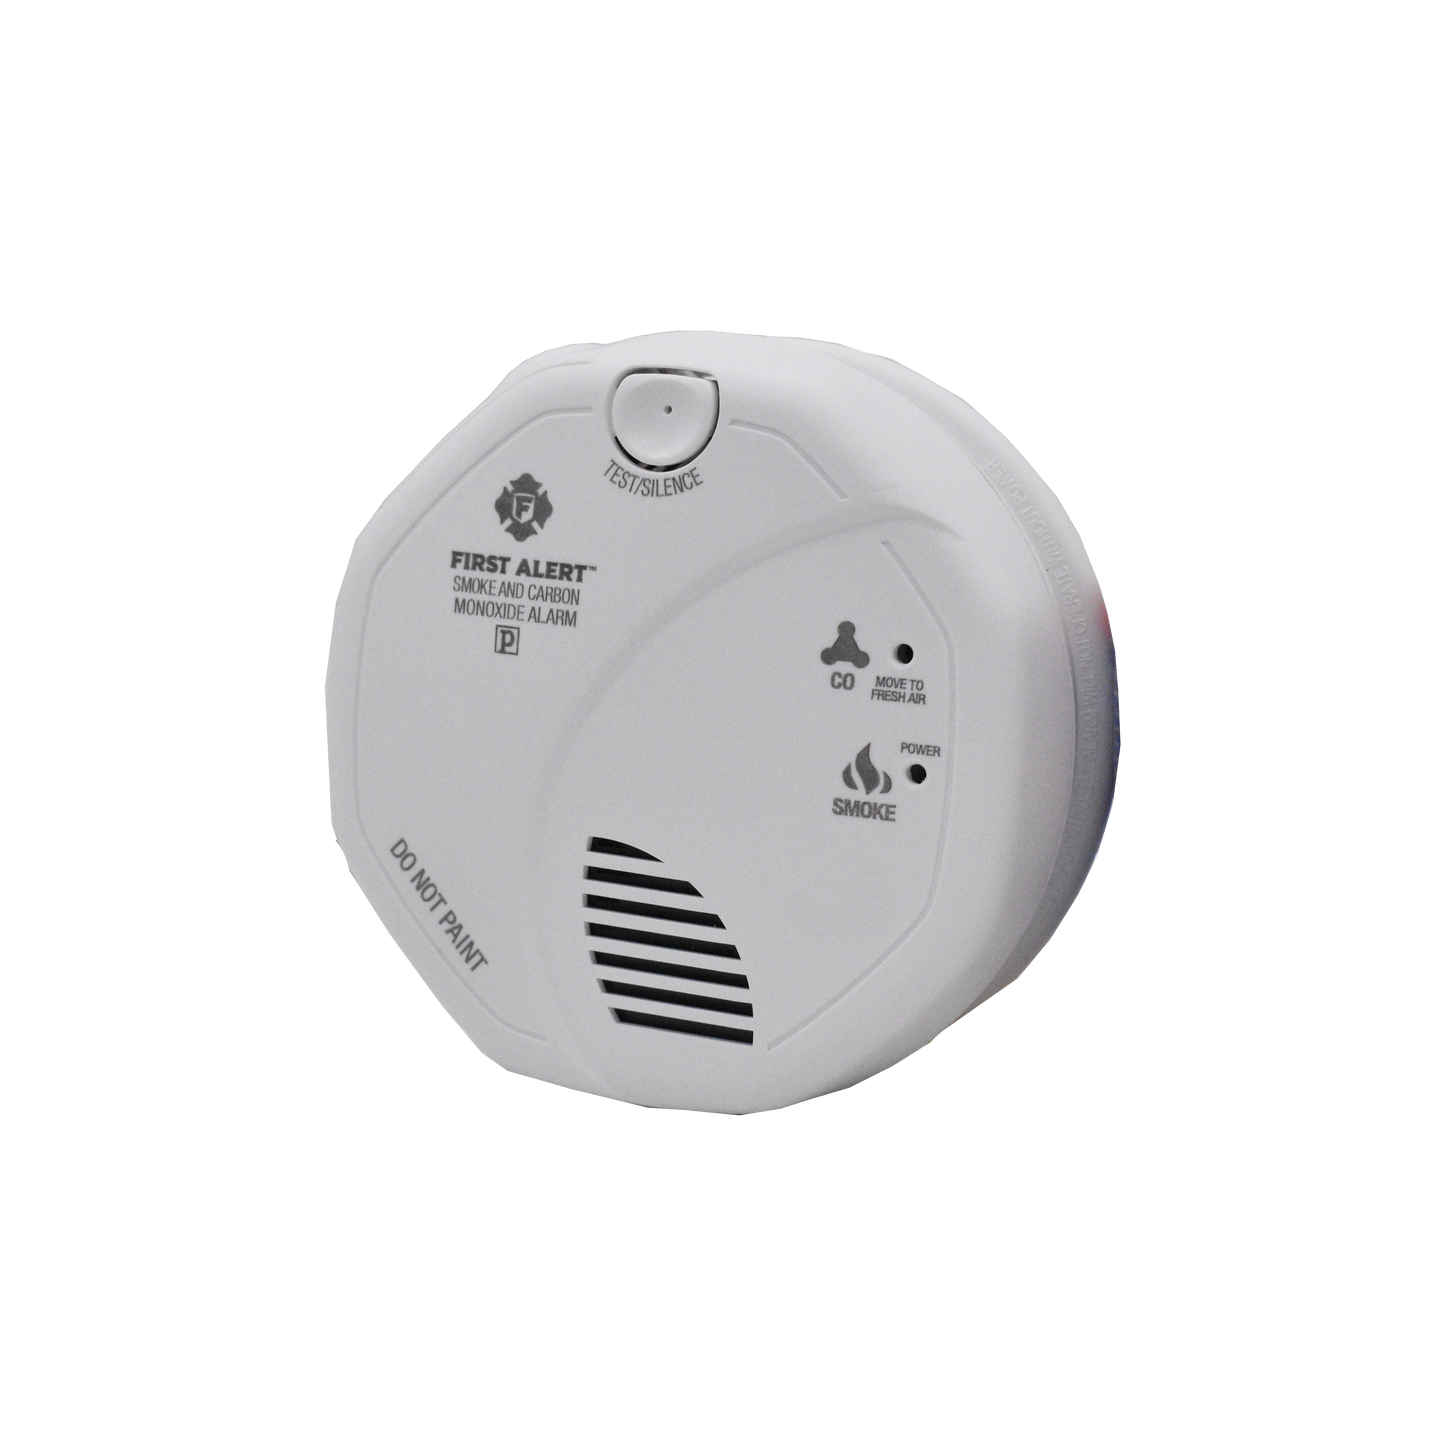 front and side view hardwired smoke detector camera